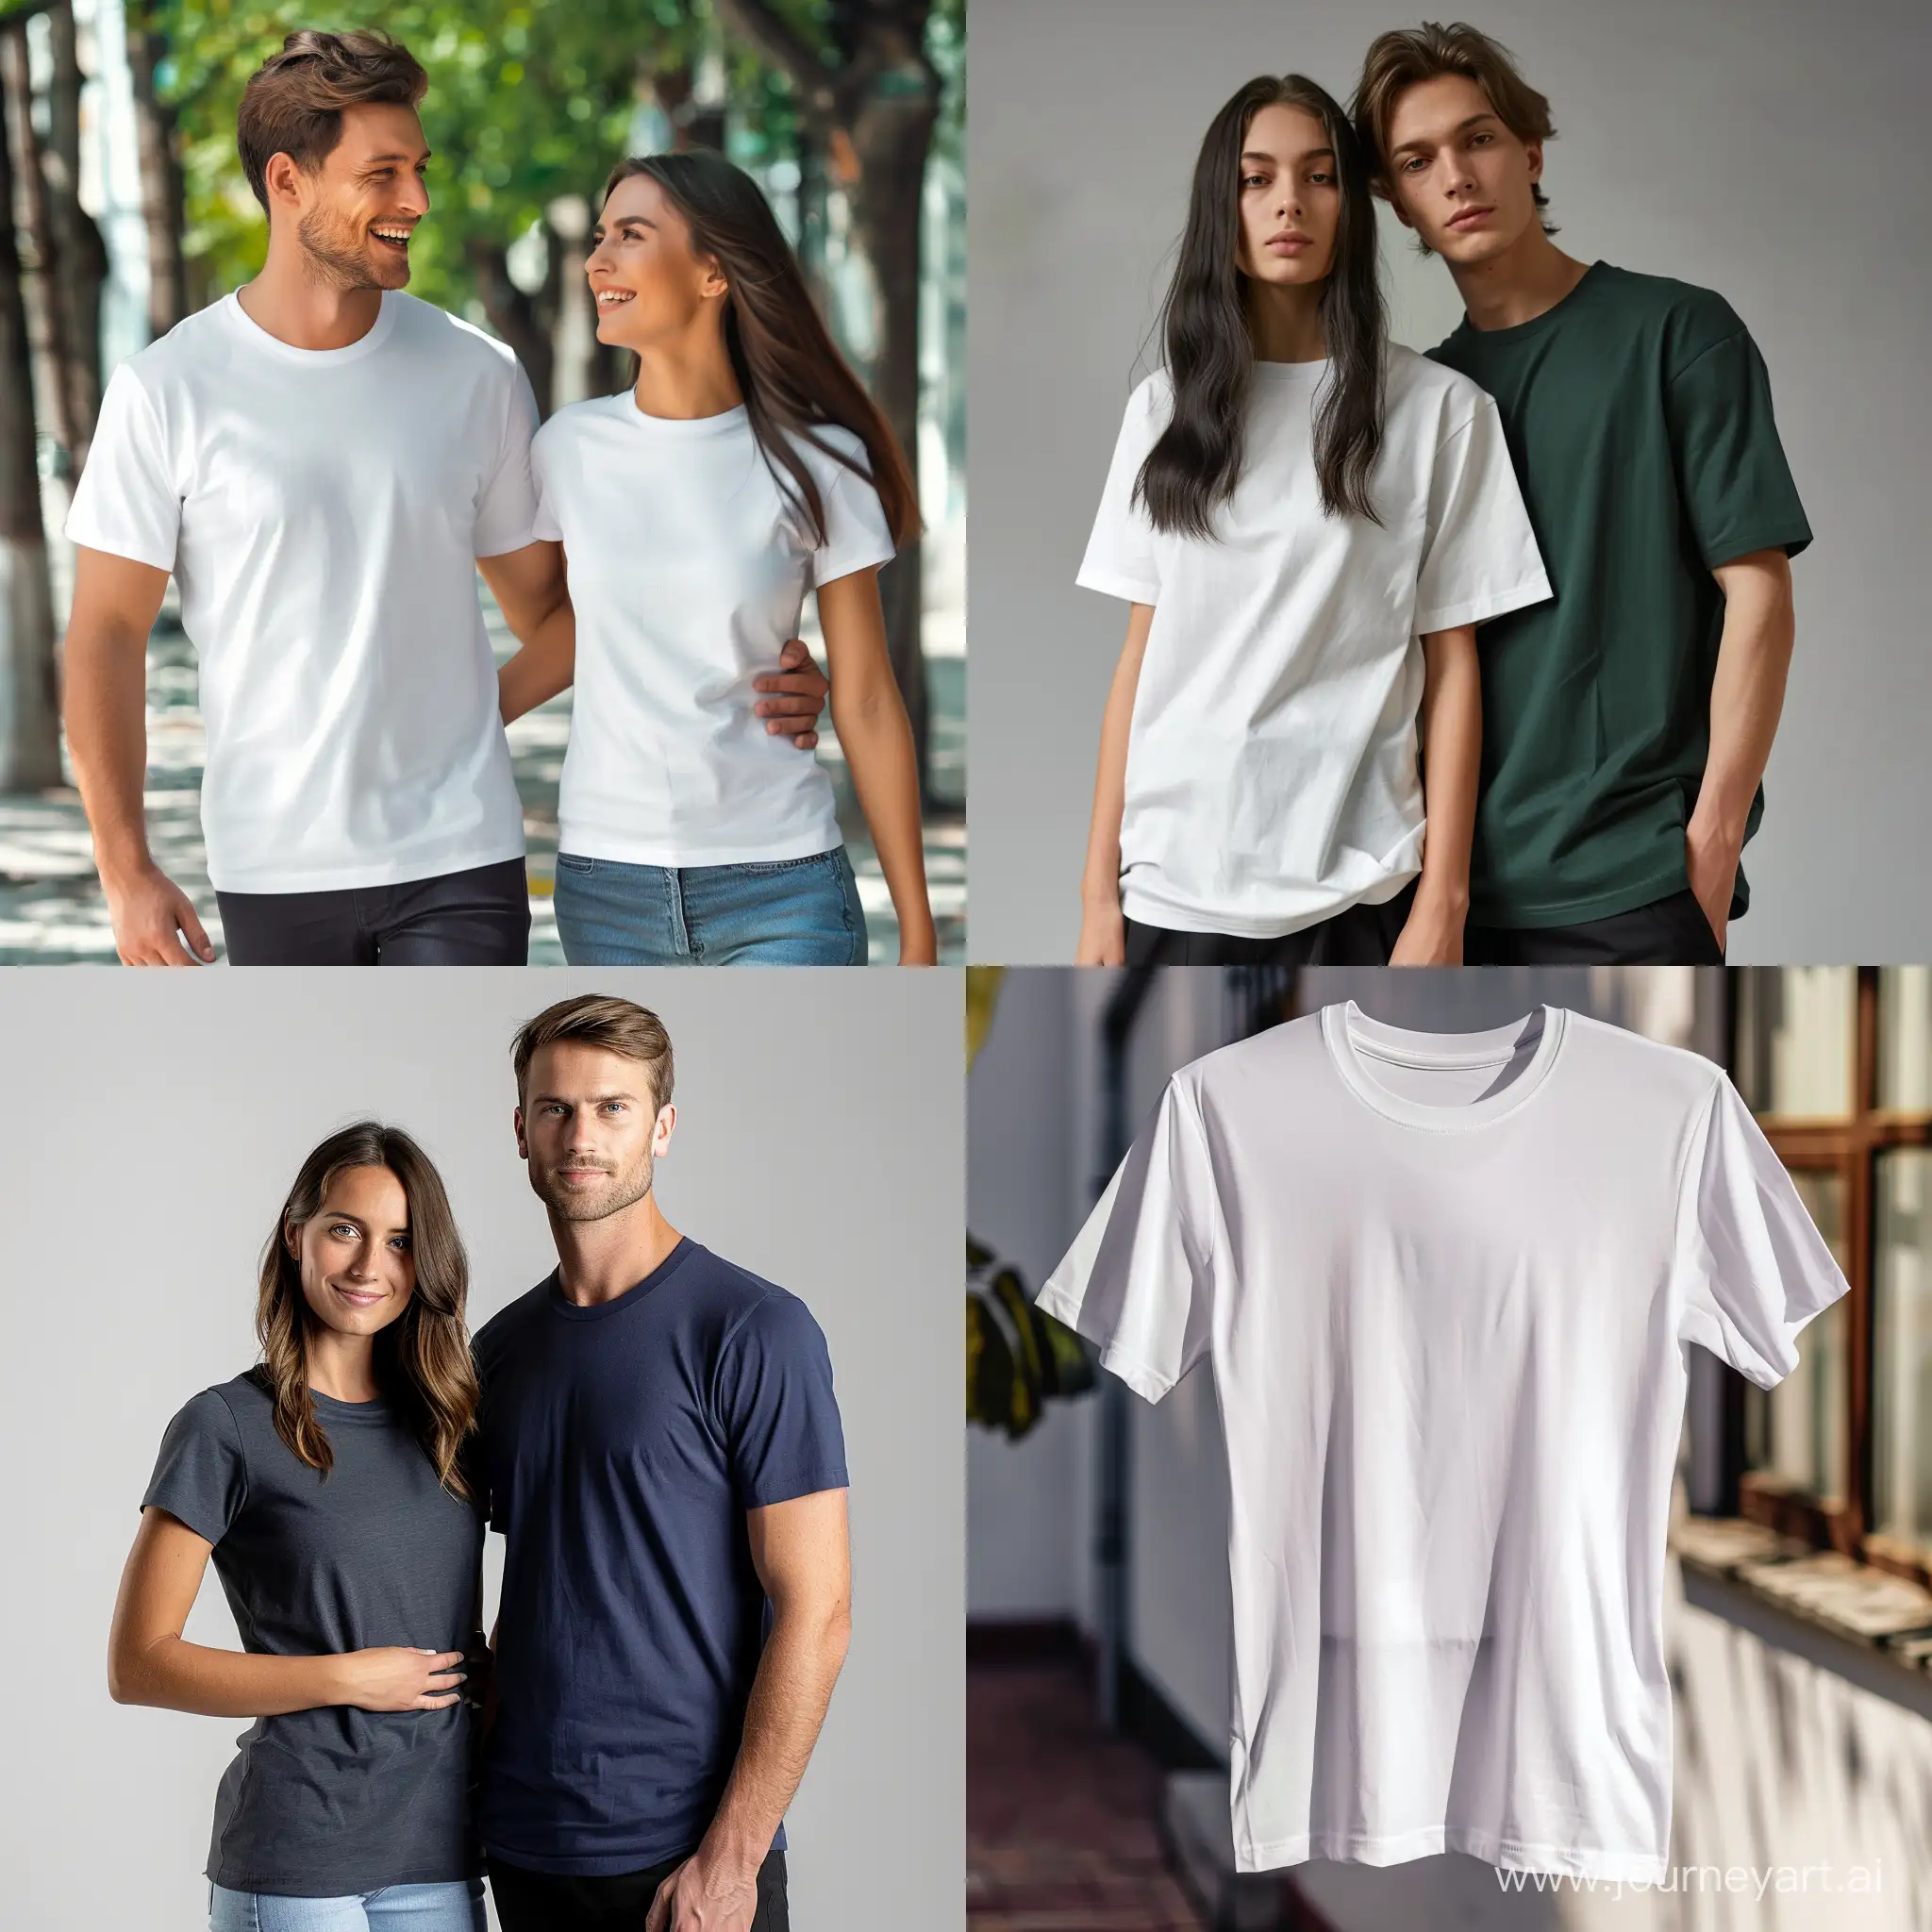 hello I want image of Men and Women T-shirt without any logo